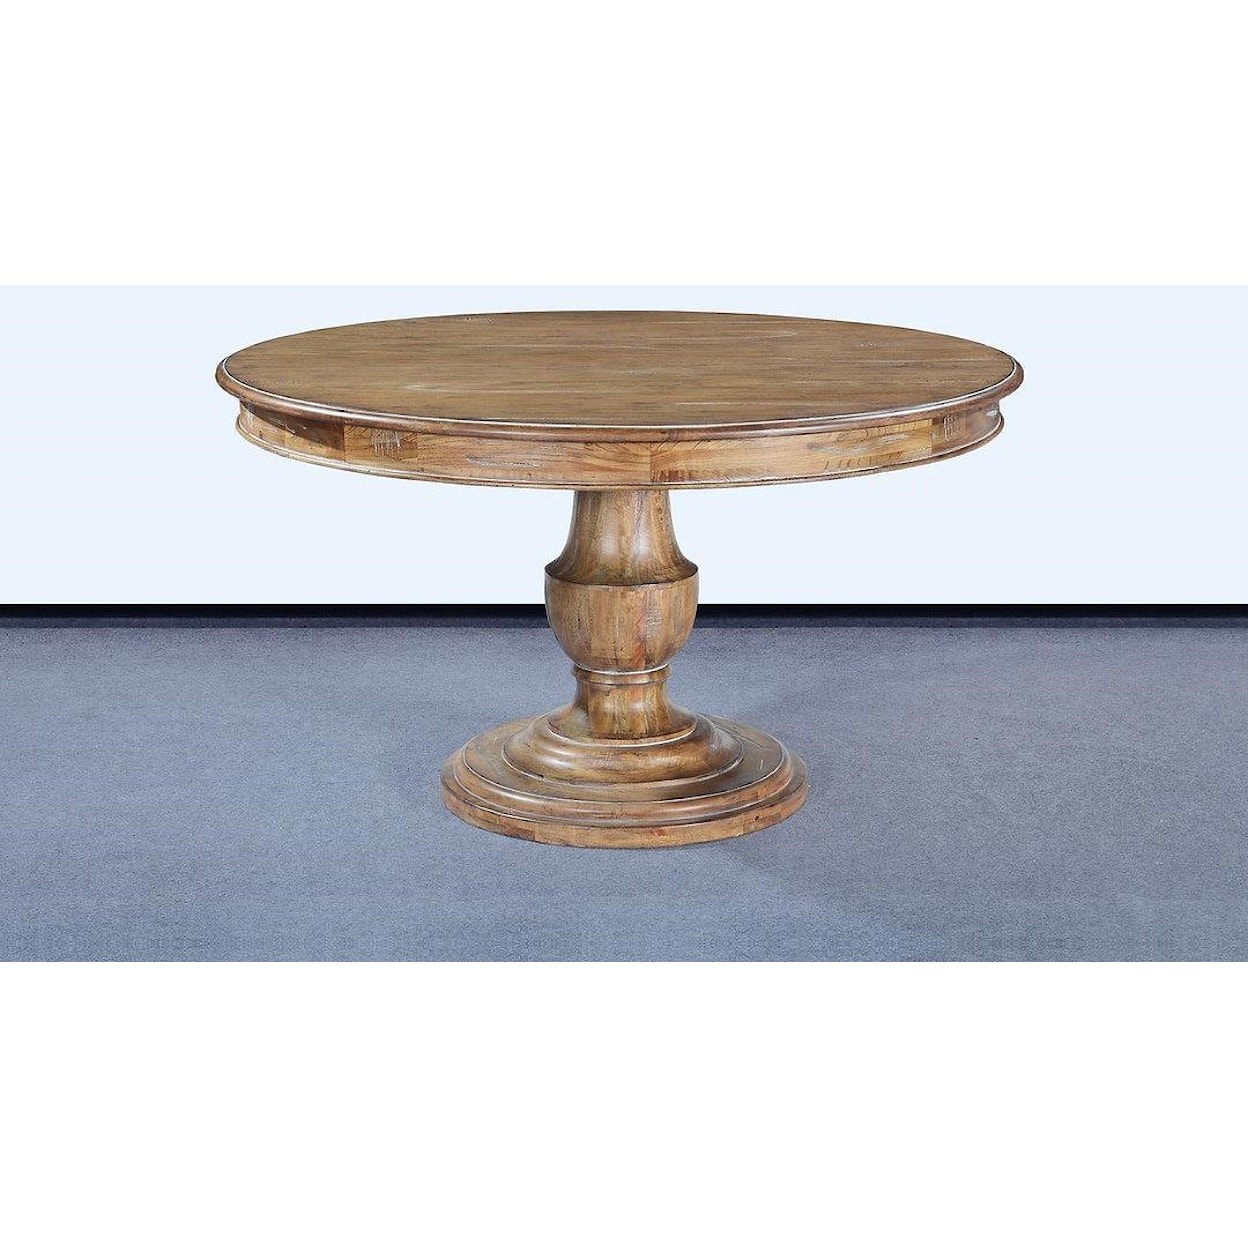 BG Industries Tables Scottsdale Dining Table 54"